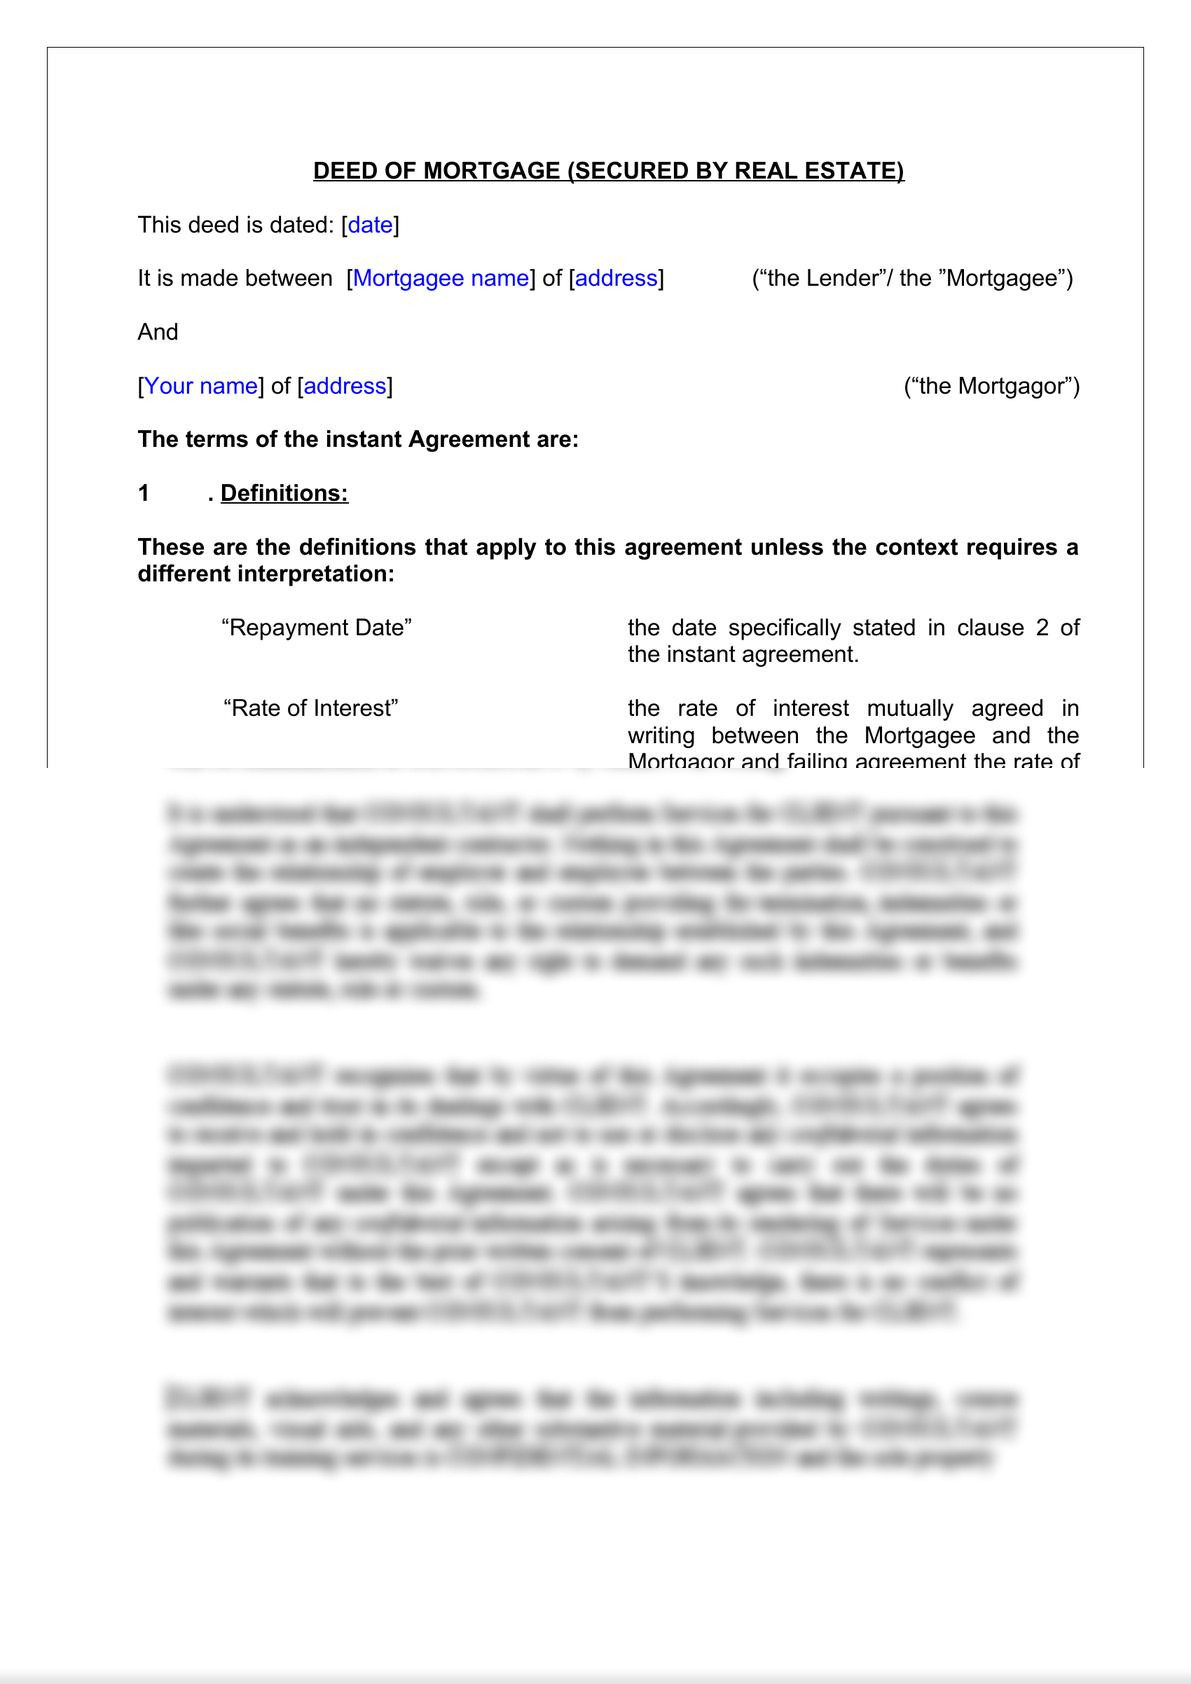 Deed of Mortgage -2